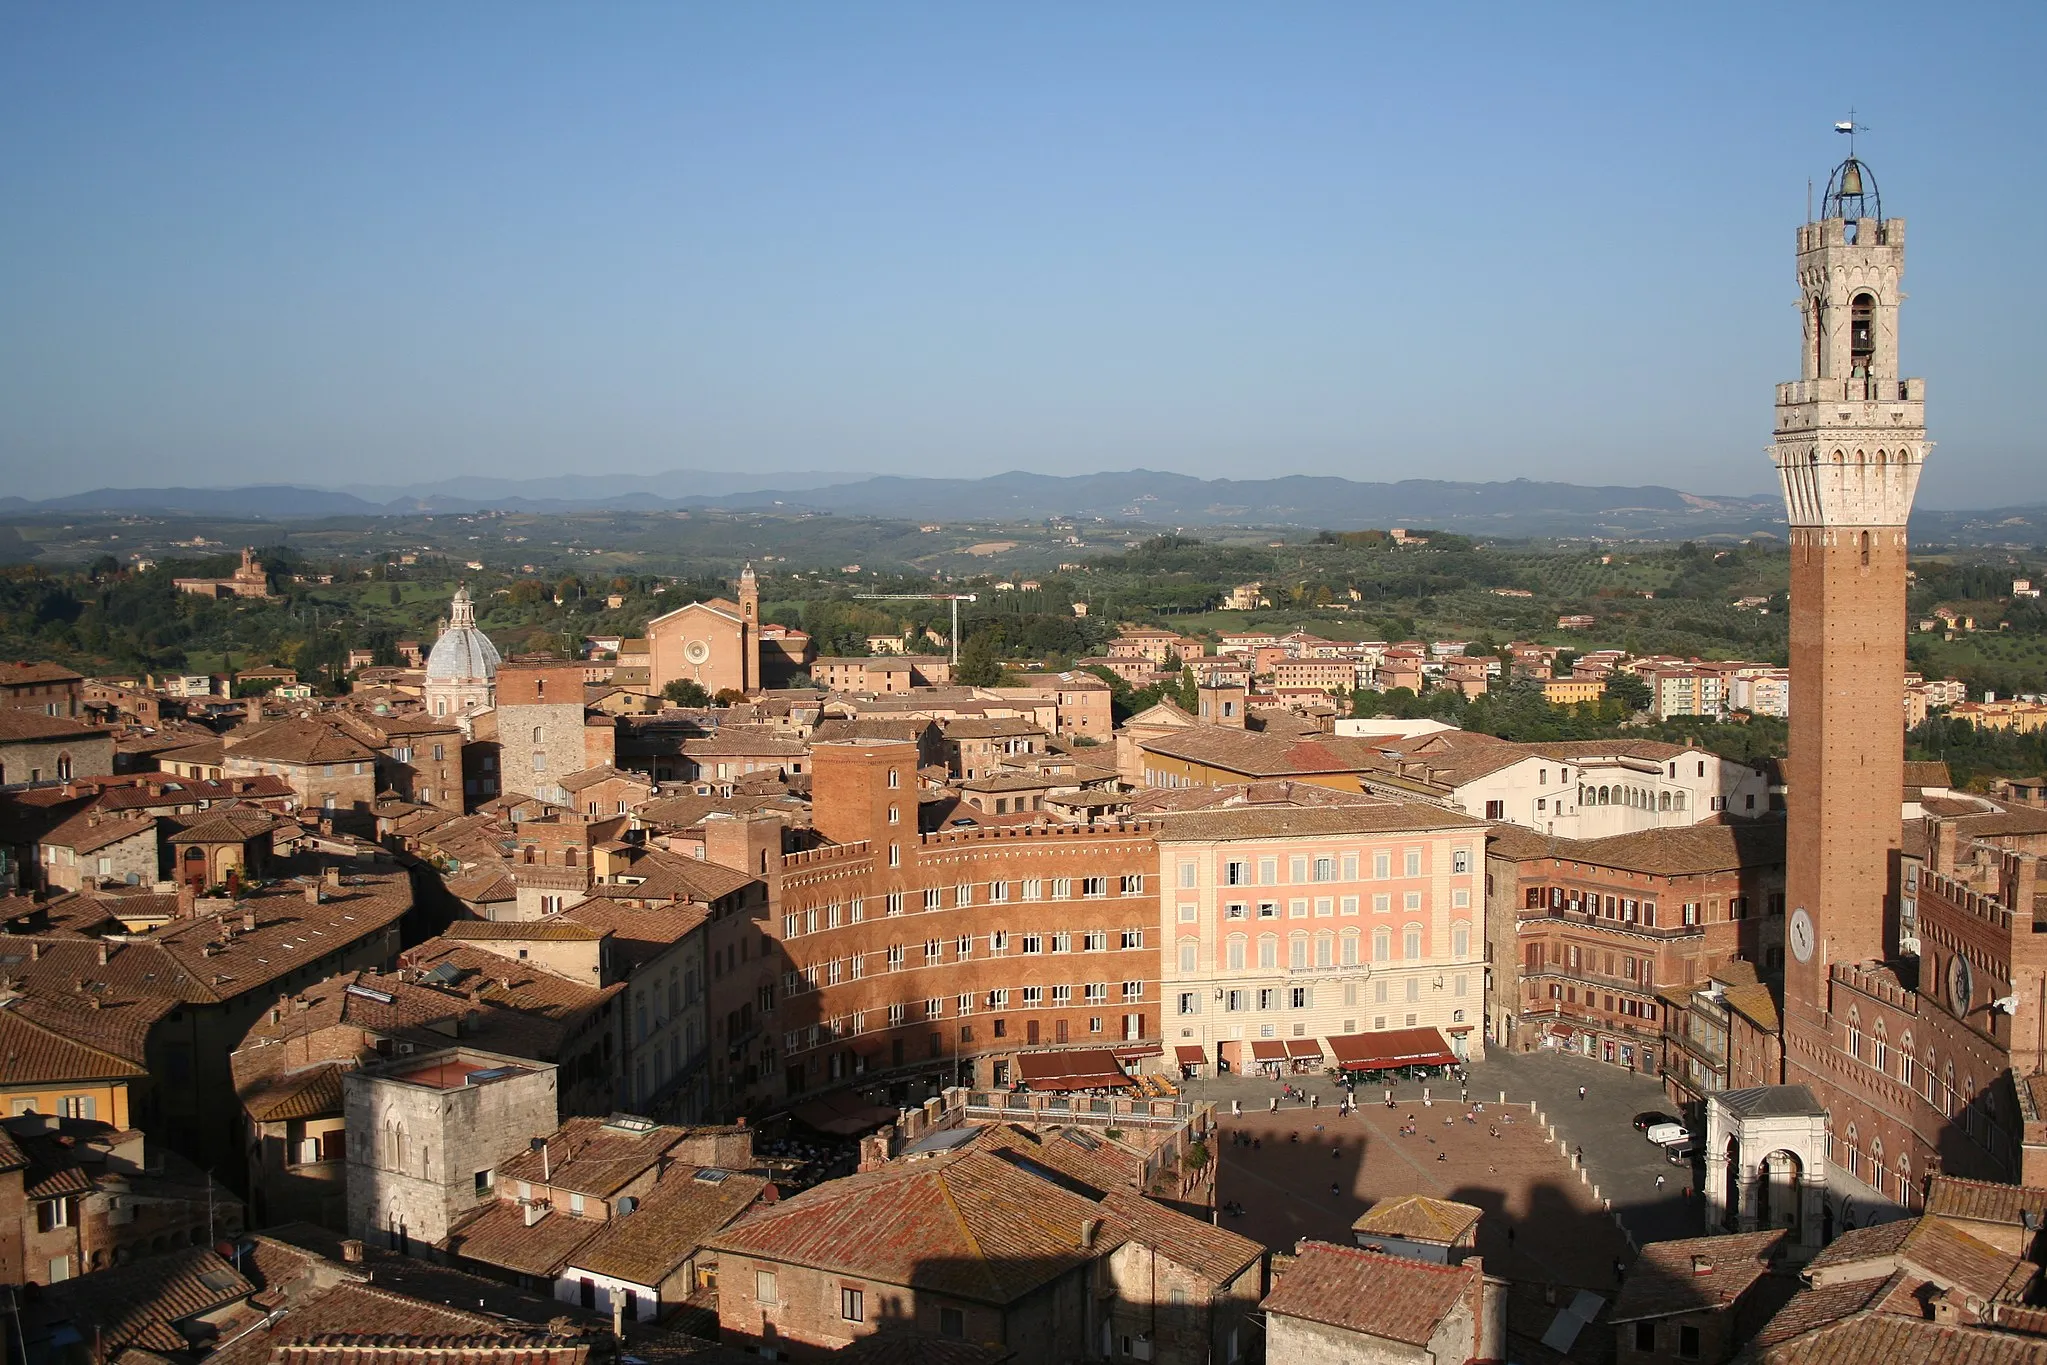 Photo showing: A photograph taken of the Piazza del Campo in Siena with tower Torre del Mangia and landscape with hills in background.